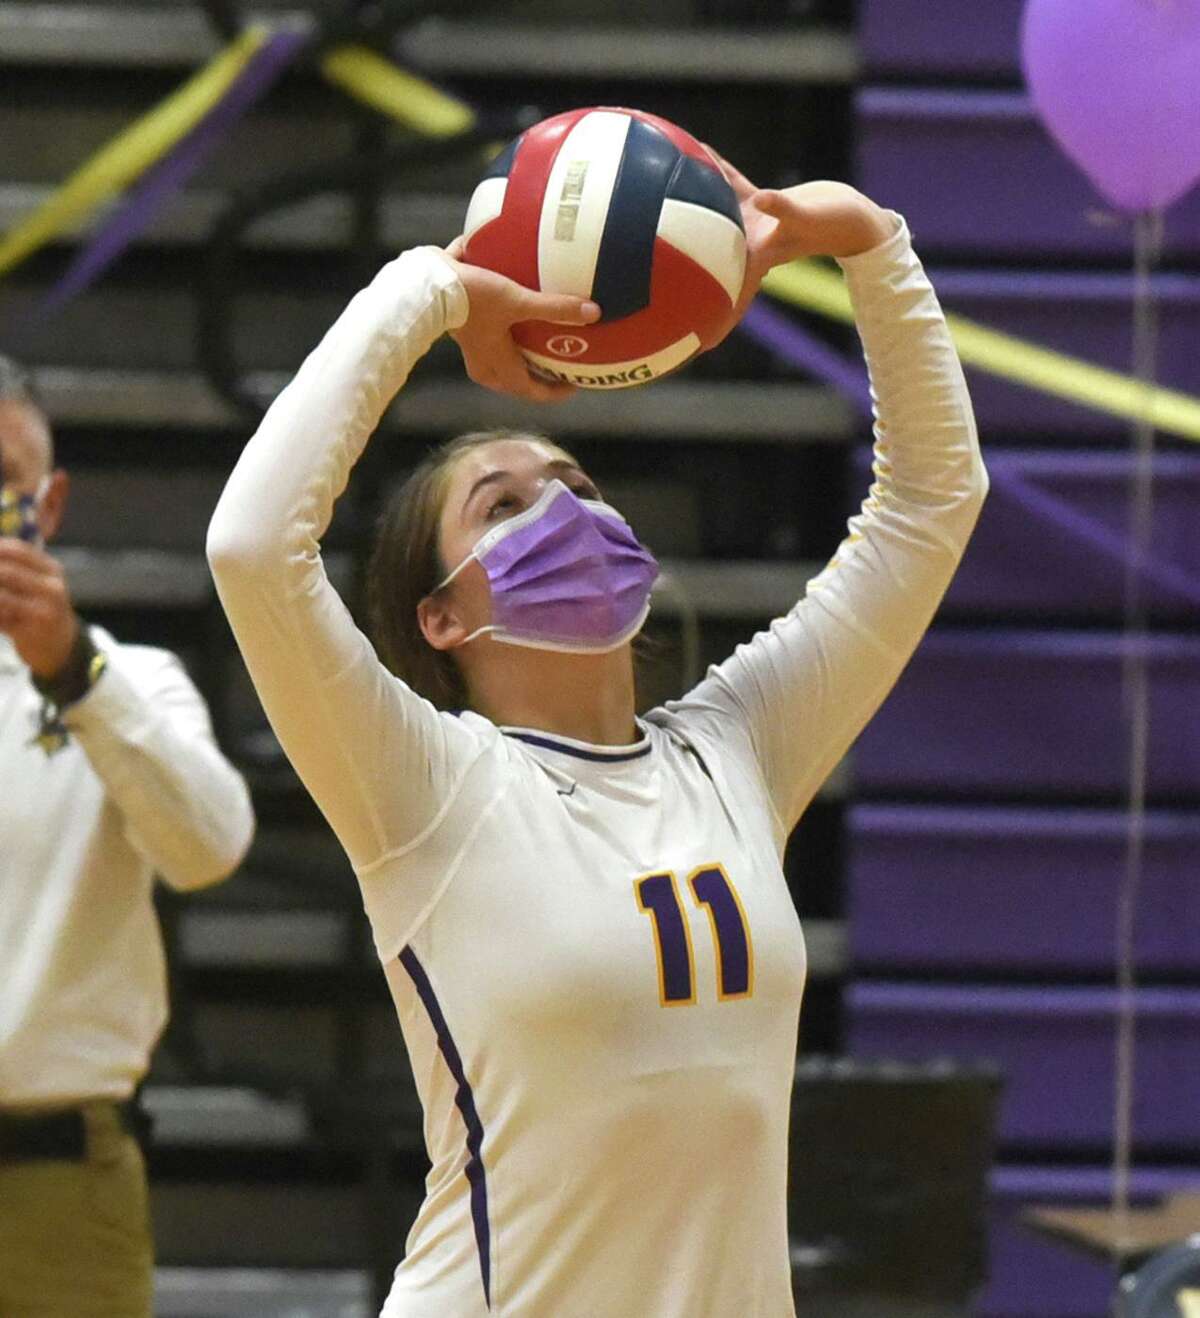 Westhill's Vana Servos (11) sets the ball during the Vikings' season-opening volleyball match against Stamford at Westhill High School on Thursday, Oct. 1, 2020